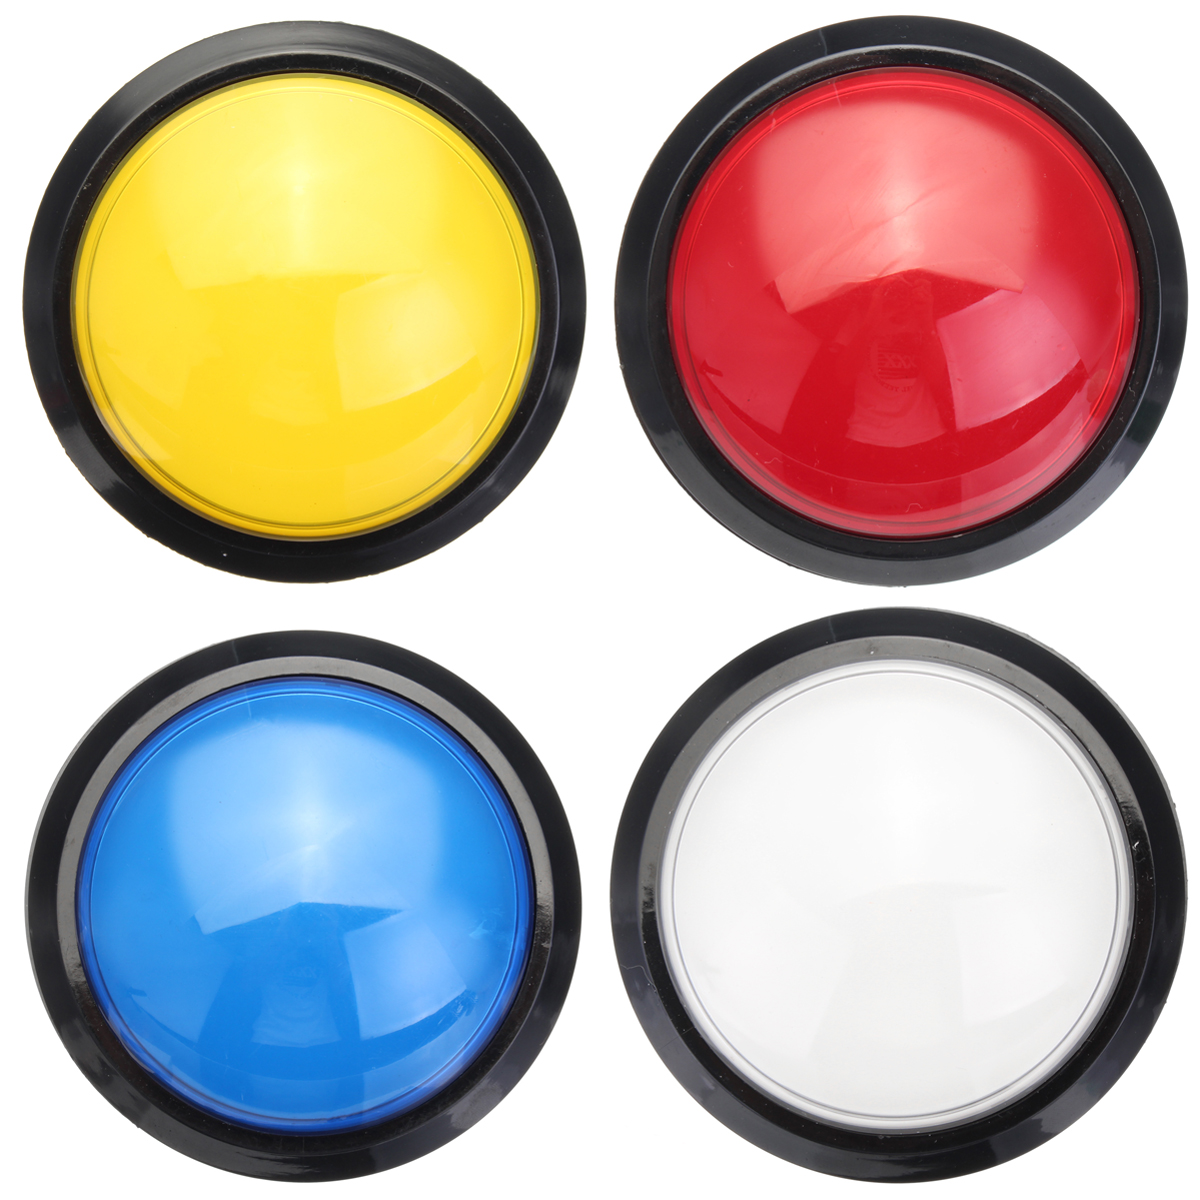 100mm Massive Arcade Button with LED Convexity Console Replacement Button 39